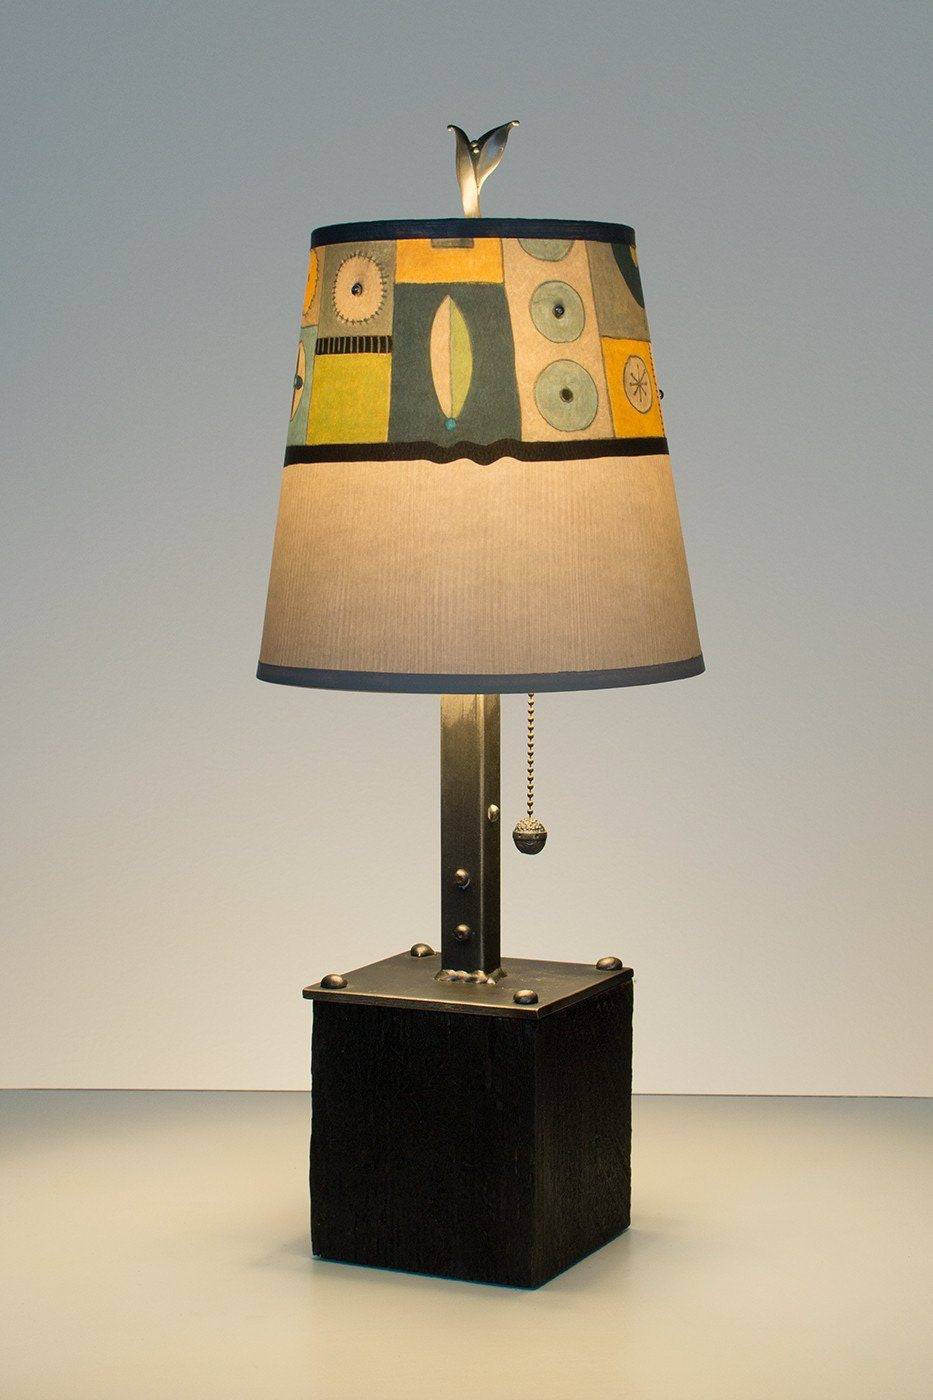 Steel Table Lamp on Reclaimed Wood with Small Drum Shade in Lucky Mosaic Oyster Lit